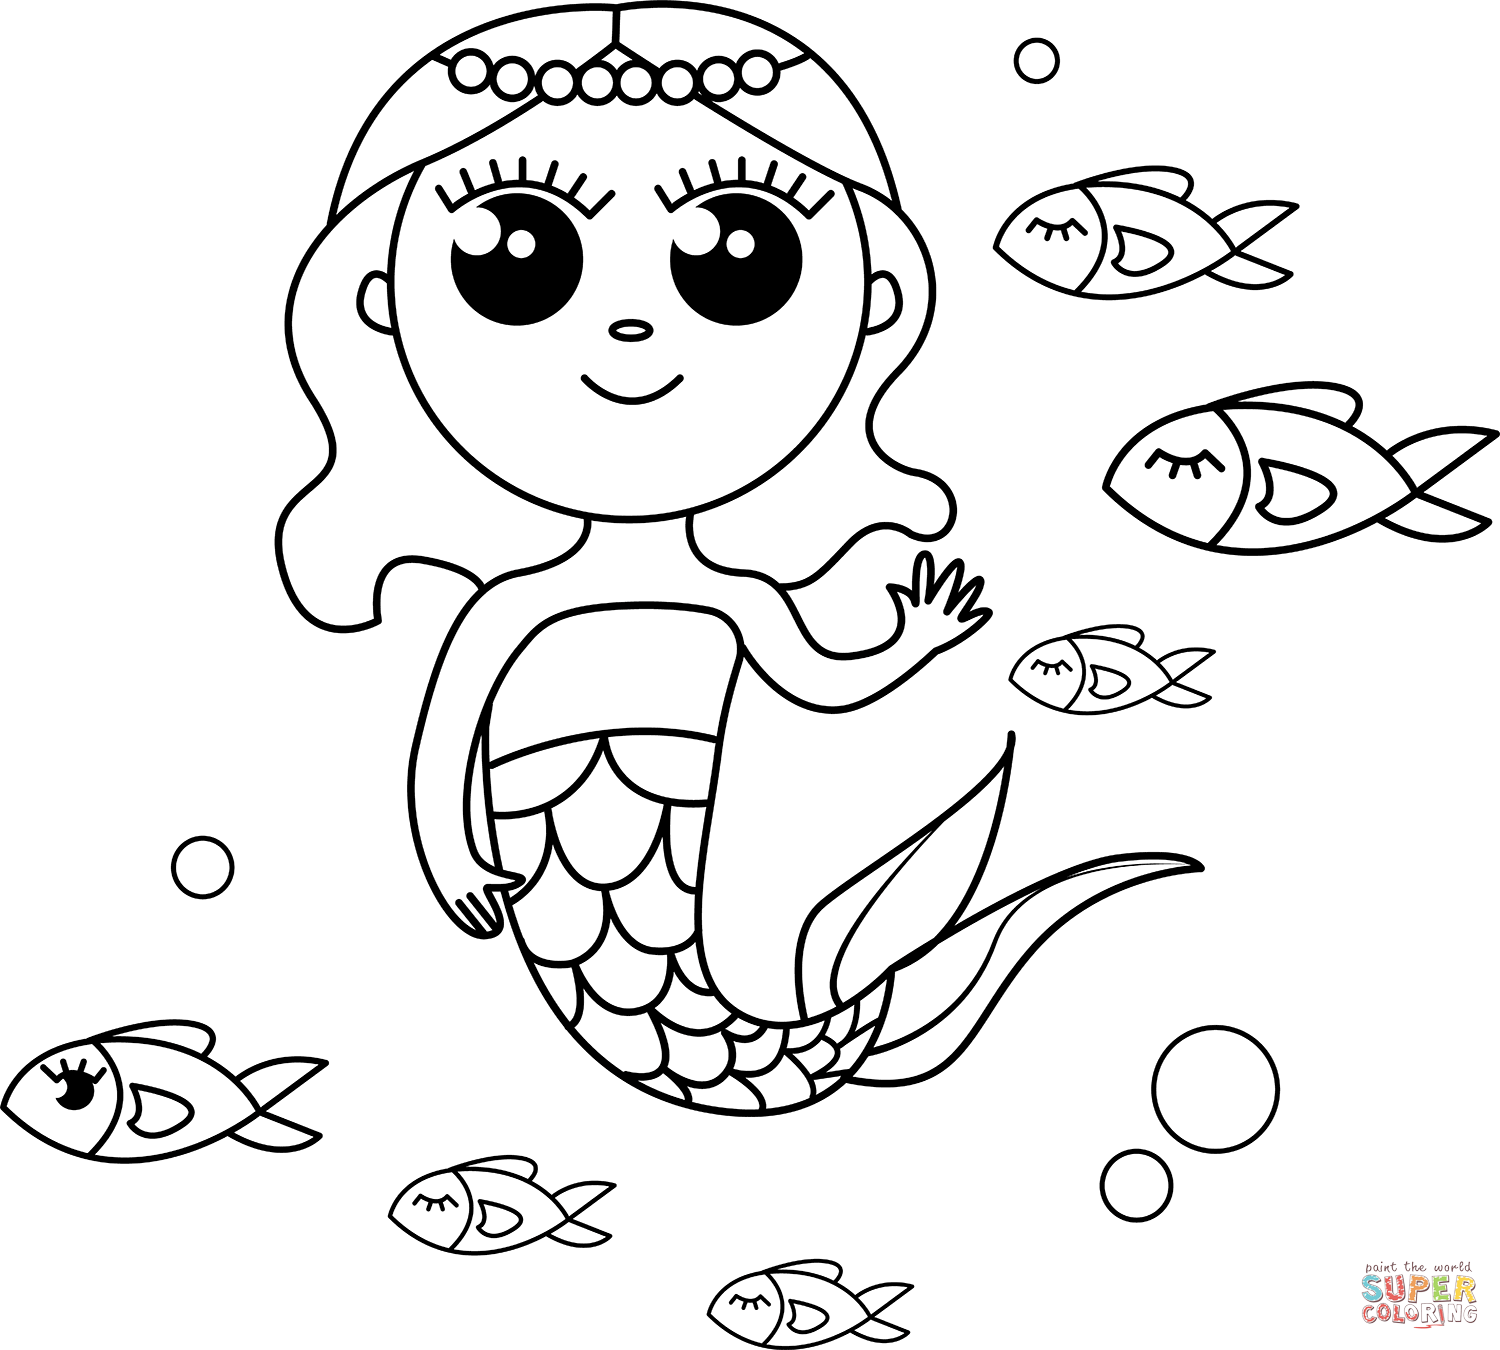 Easy mermaid coloring page free printable coloring pages